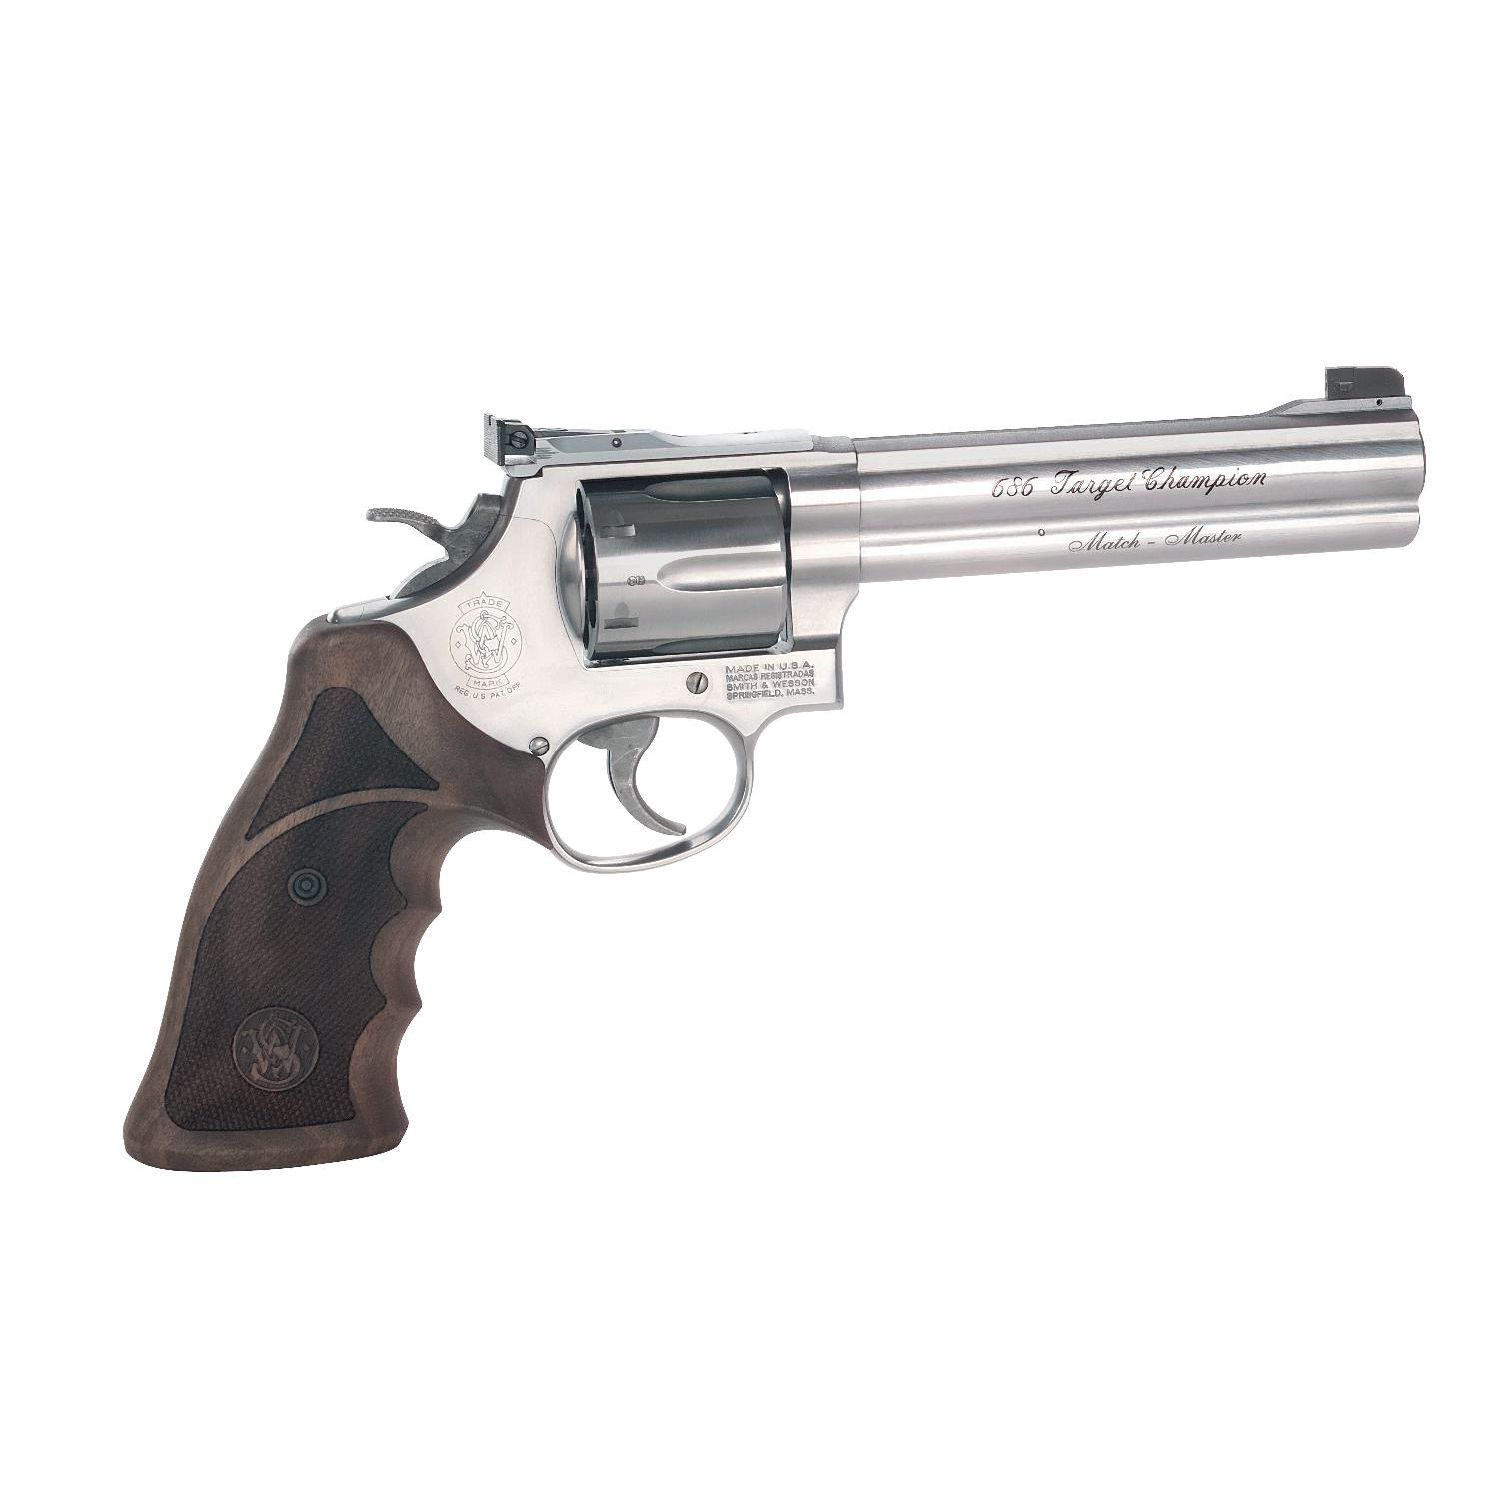 Smith & Wesson Modell 686 Match Master